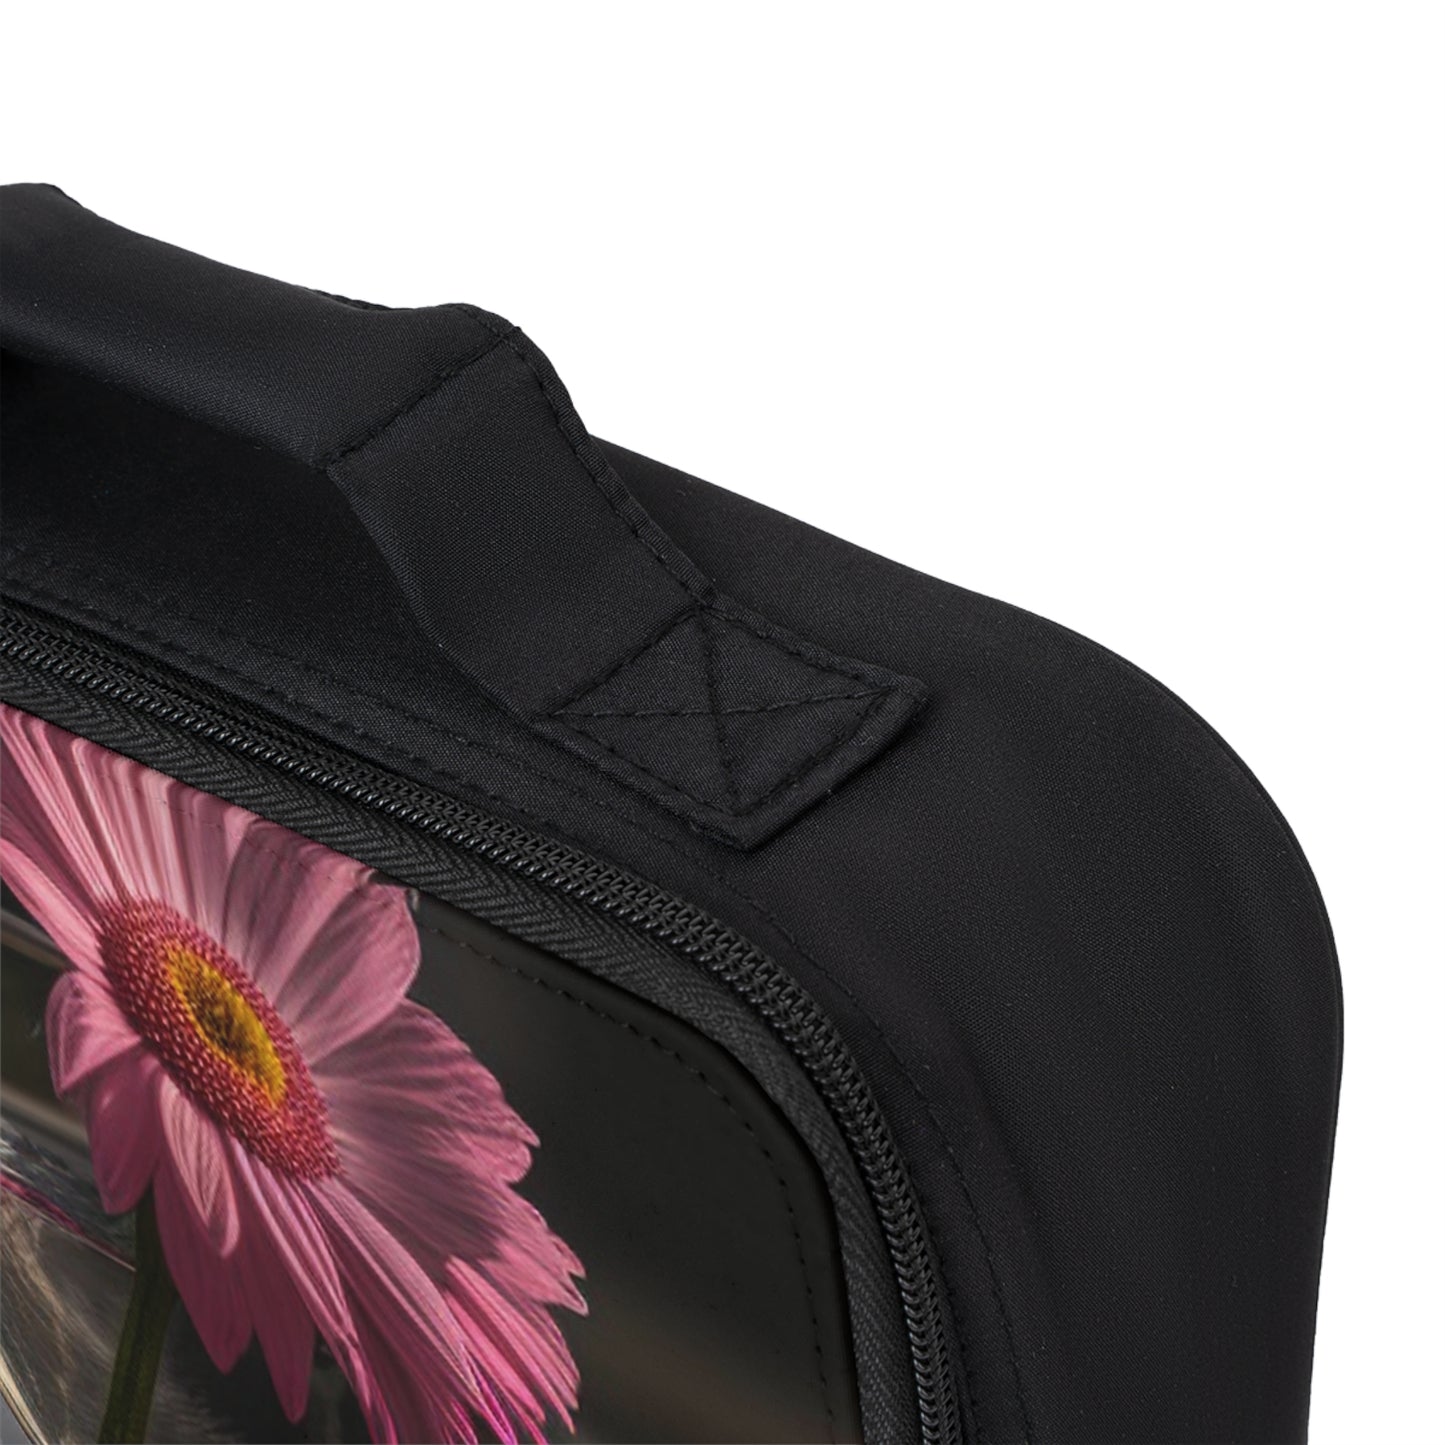 Lunch Bag Pink Daisy 2